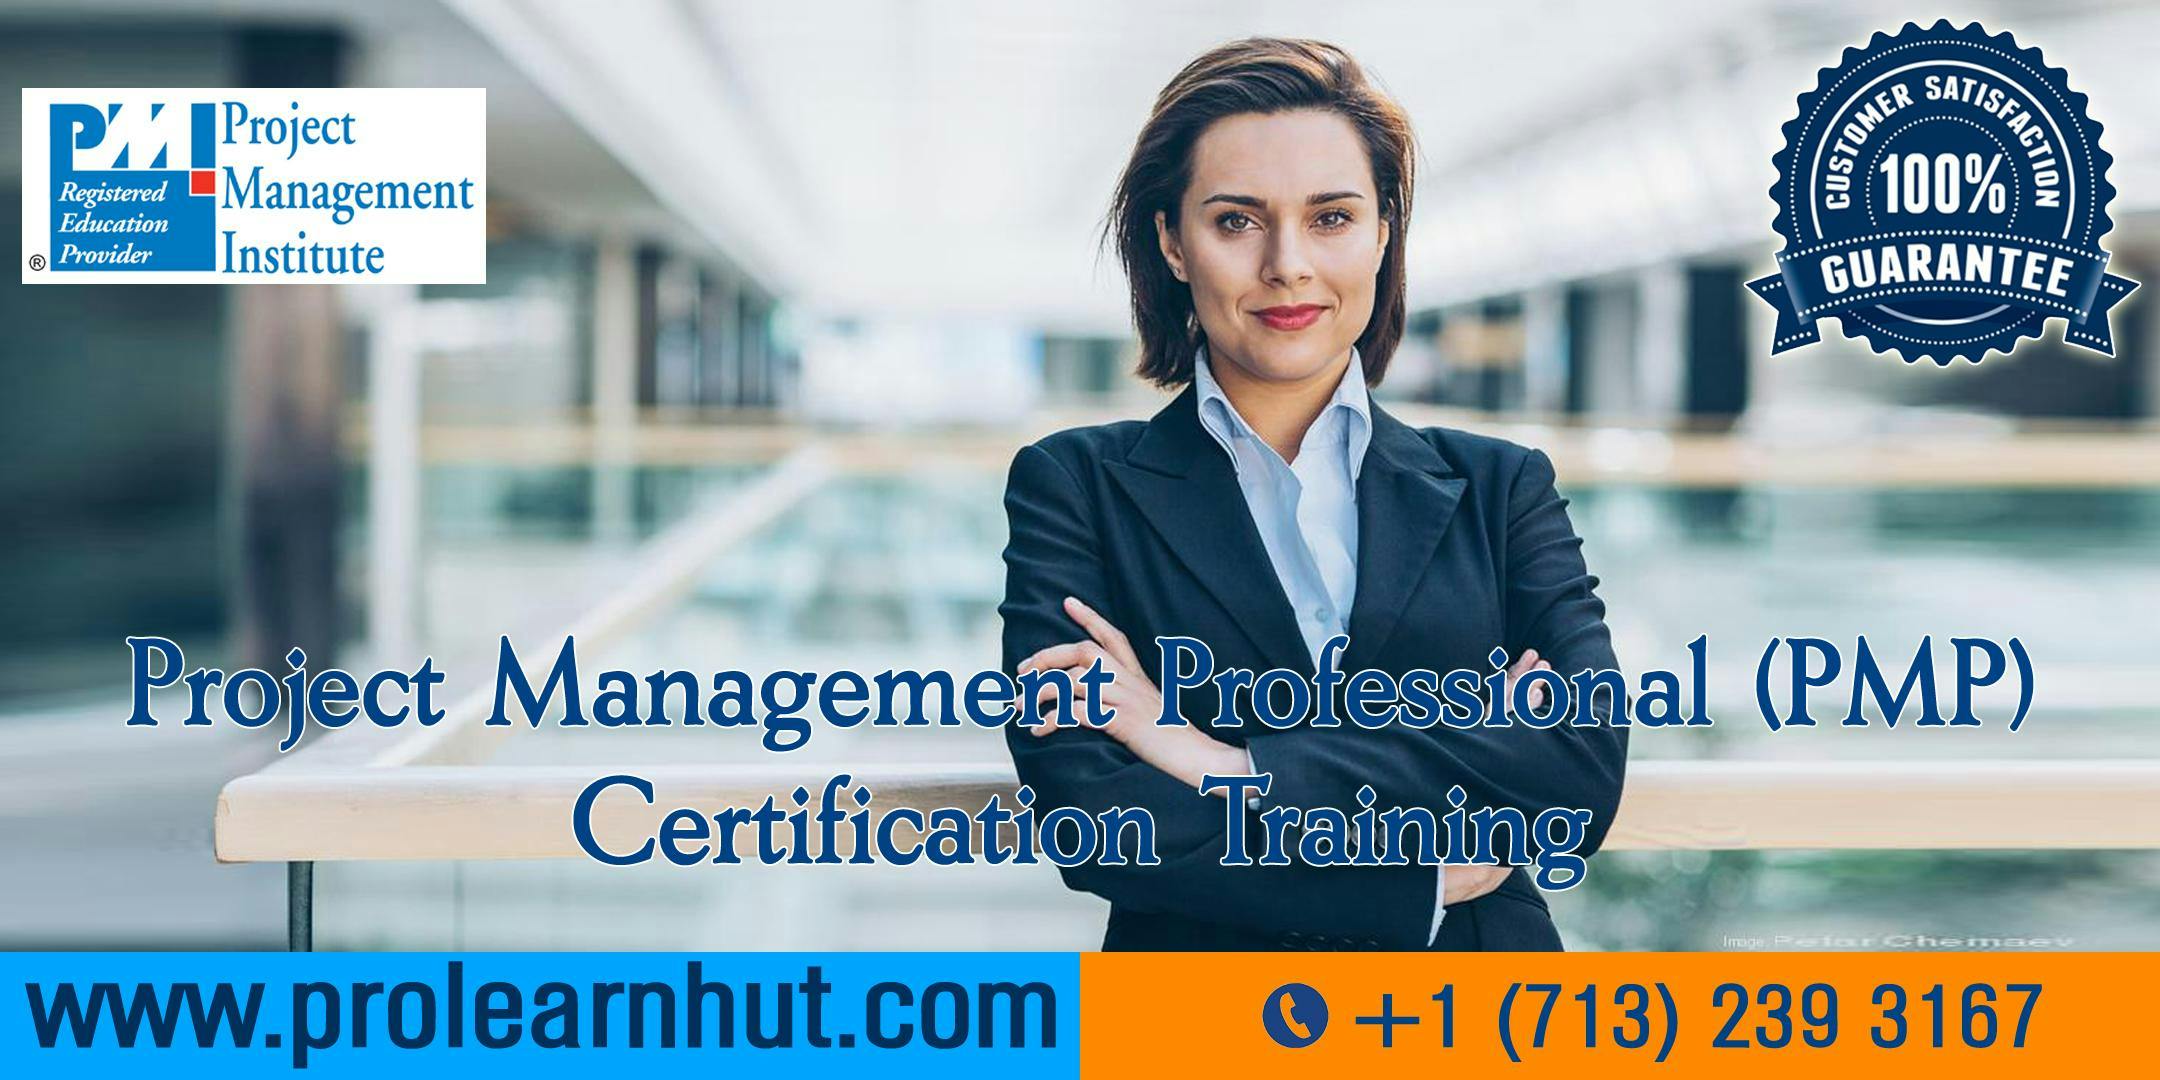 PMP Certification | Project Management Certification| PMP Training in Pomona, CA | ProLearnHut